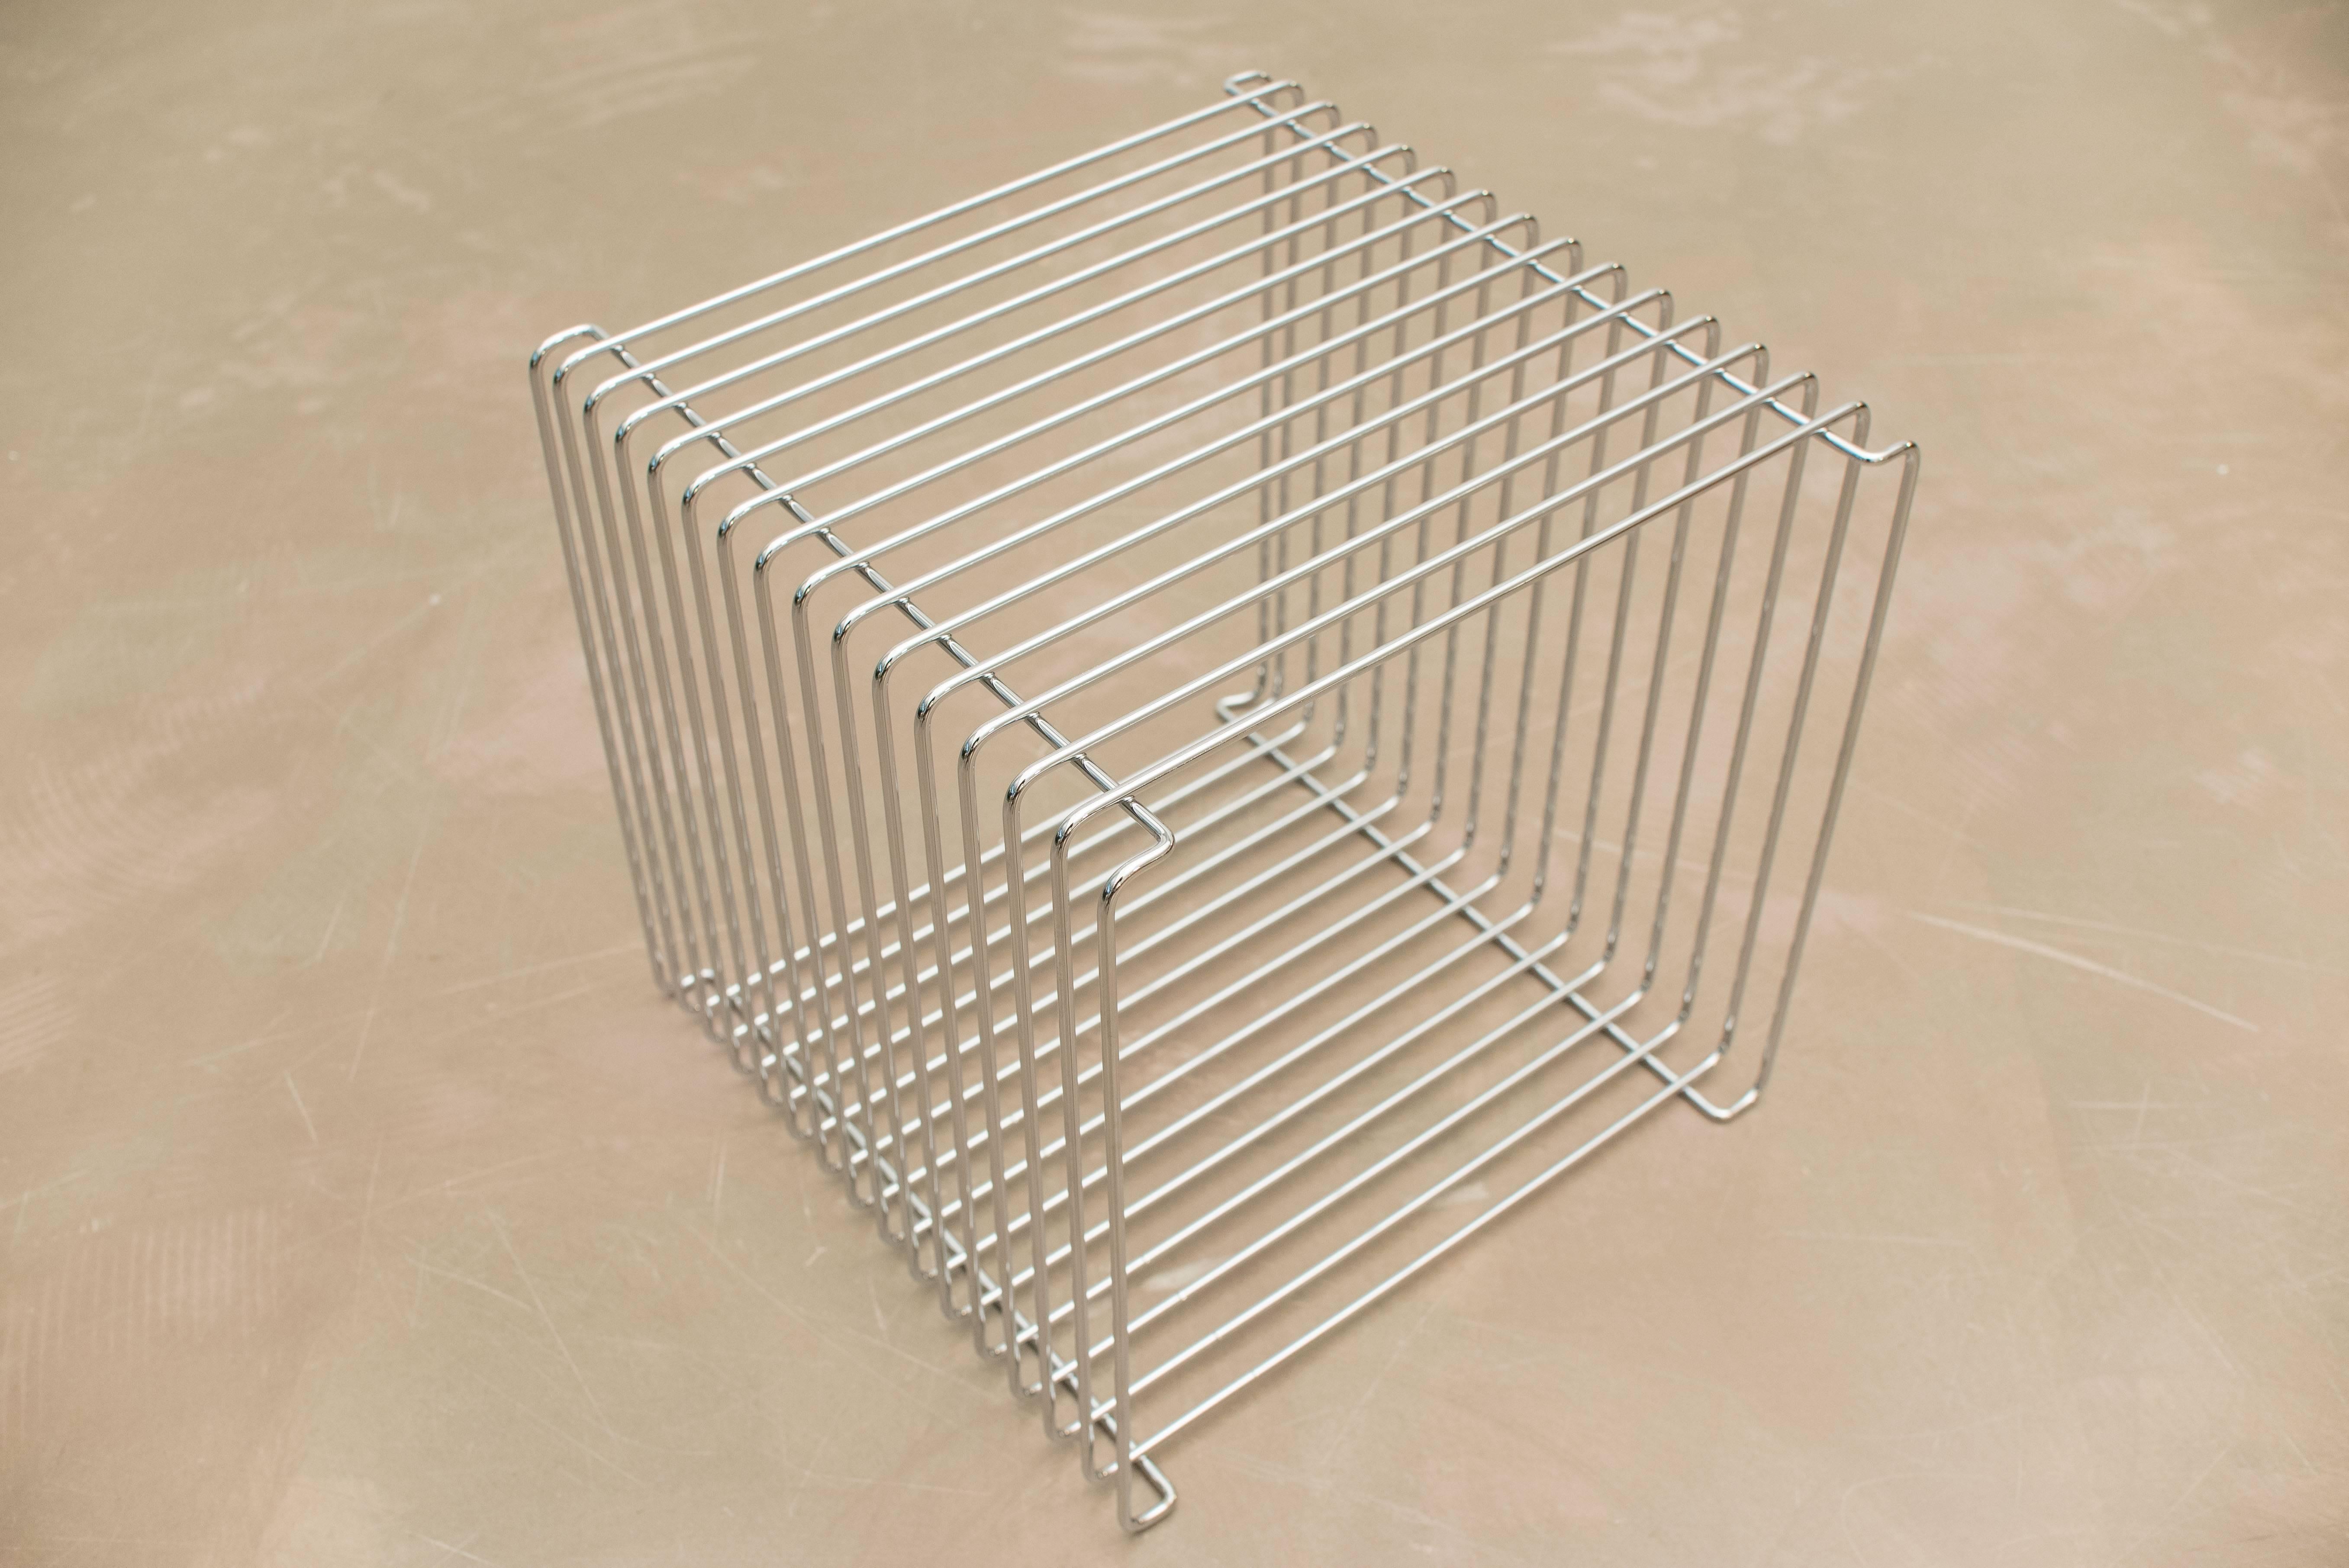 The Panton wire cube was designed by Verner Panton for Montana, 1971.